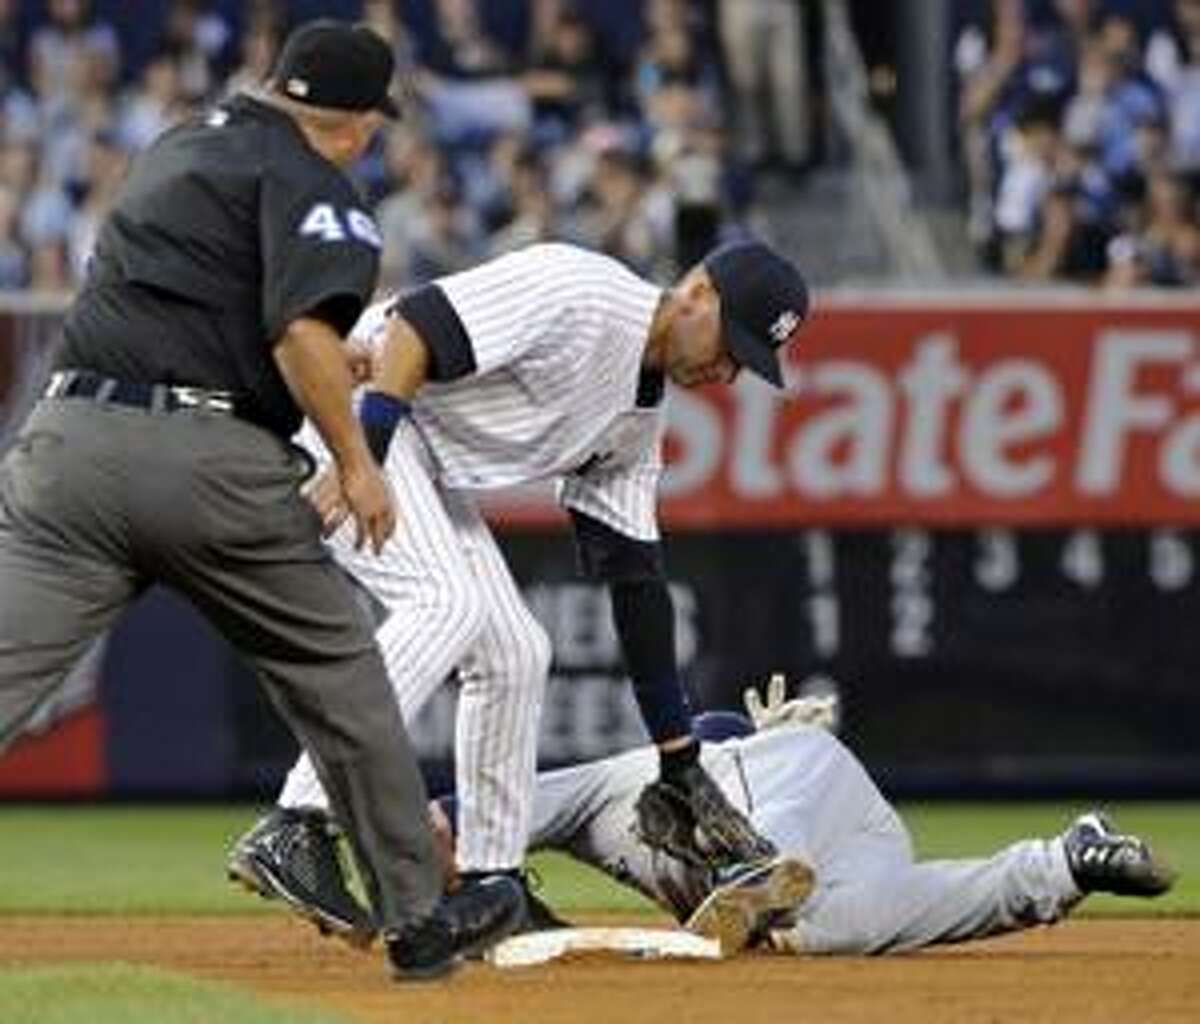 AP Umpire Ron Kulpa (46) calls Seattle Mariner runner Ryan Langerhans, right, out stealing after a tag by New York Yankees shortstop Derek Jeter during the second inning of a game Thursday at Yankee Stadium in New York.